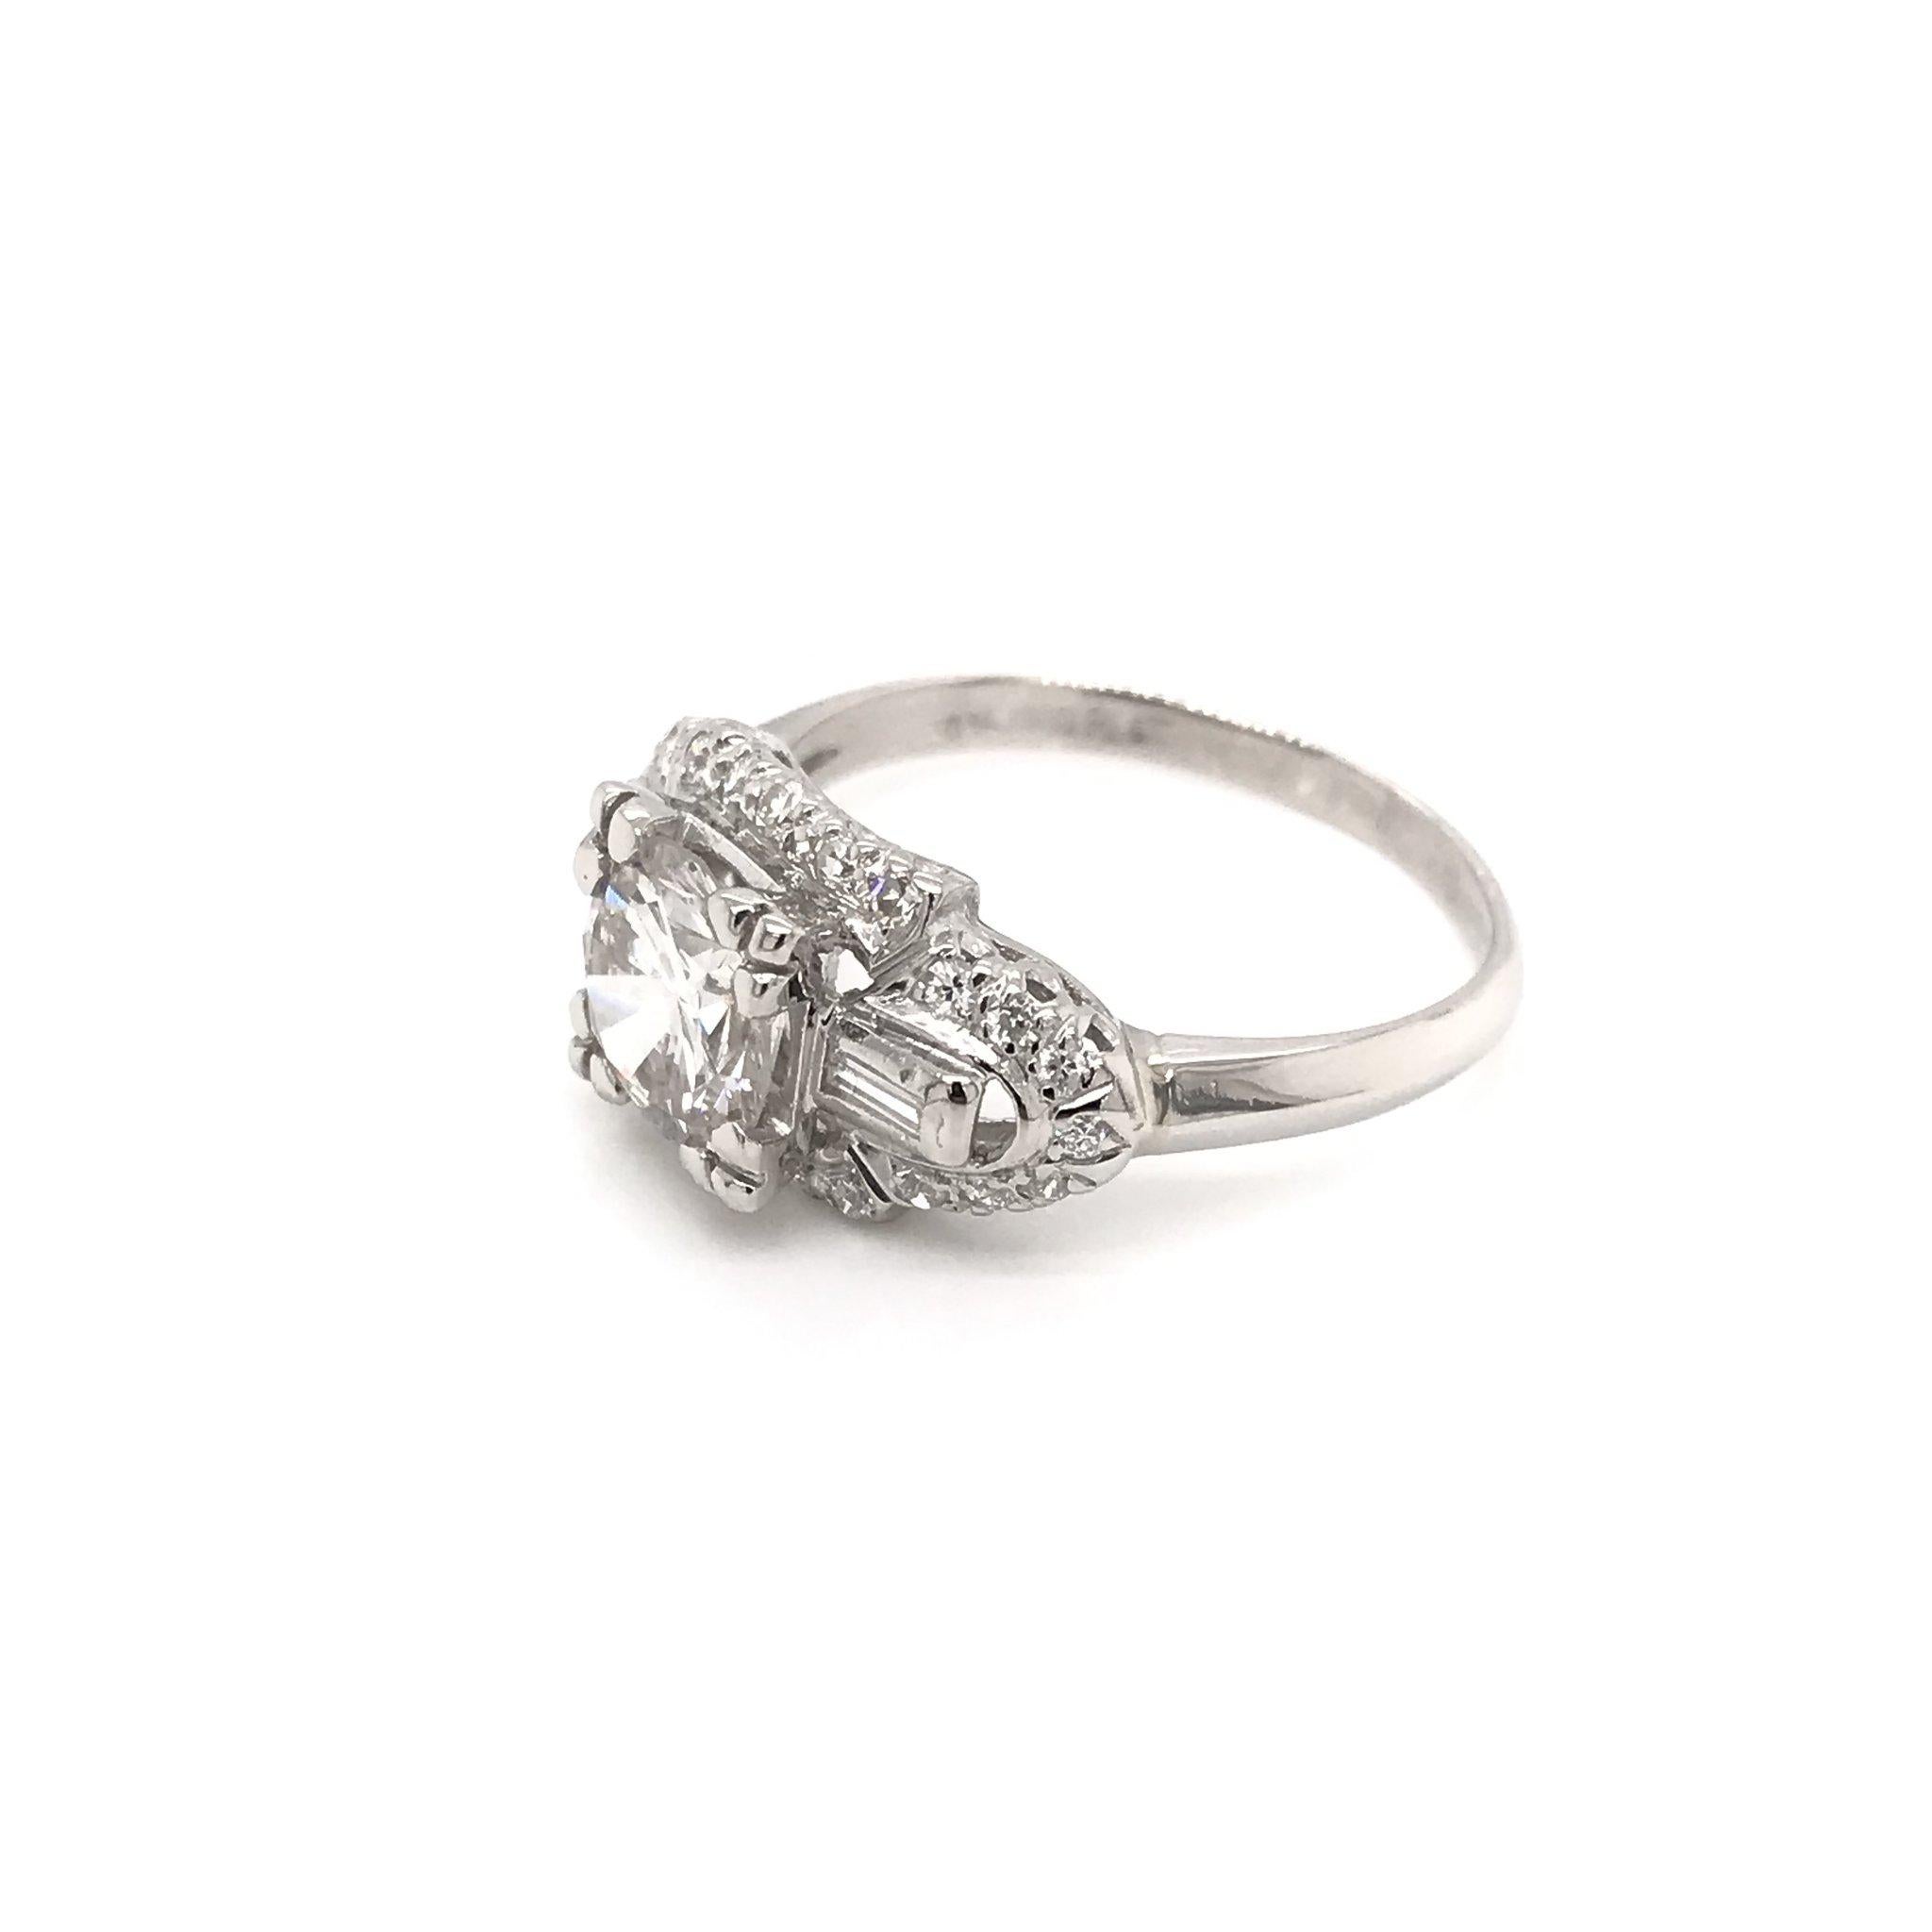 This beautiful Mid Century piece was crafted sometime during the Retro design era ( 1940-1960 ). The setting is platinum and features a center diamond measuring approximately 1.32 carats. The center diamond grades approximately I in color, SI1 in